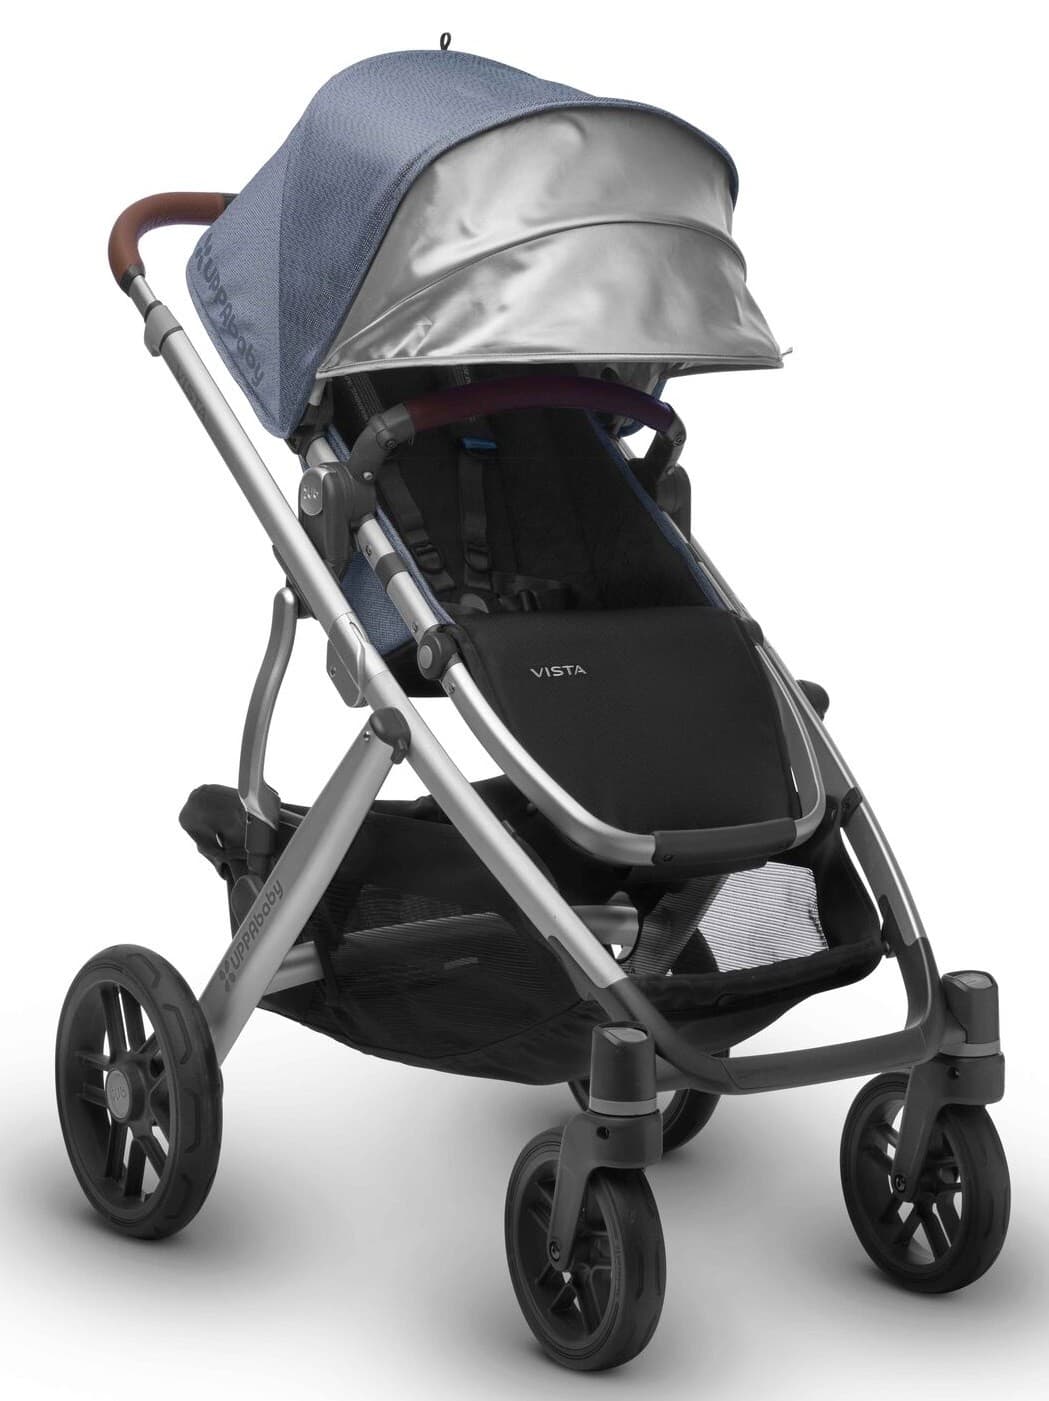 uppababy rumble seat 2017 henry